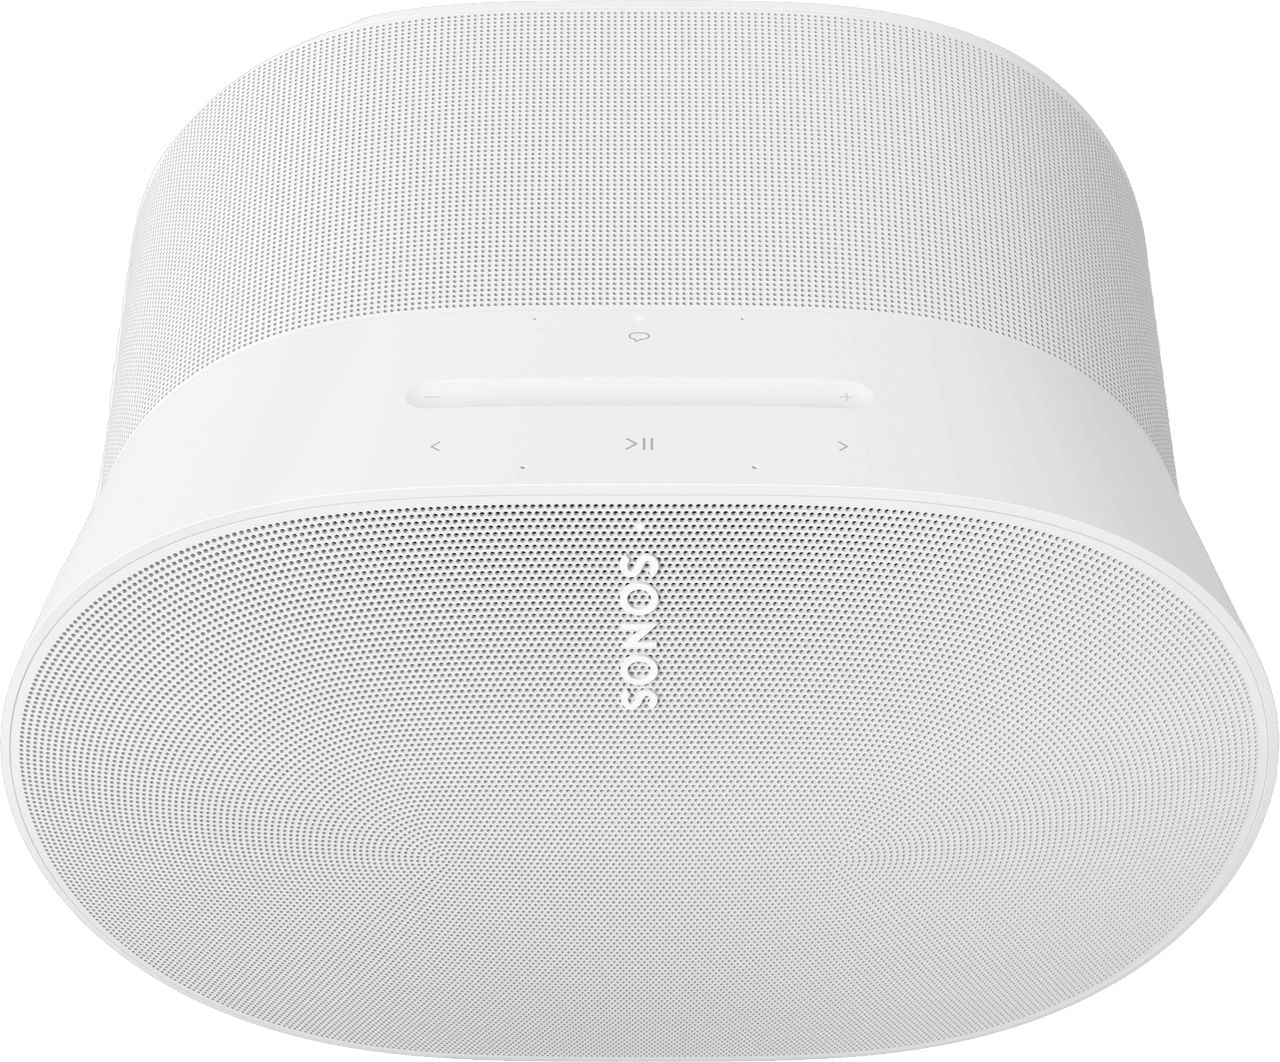 Configure McAfee Total Protection to work with Sonos